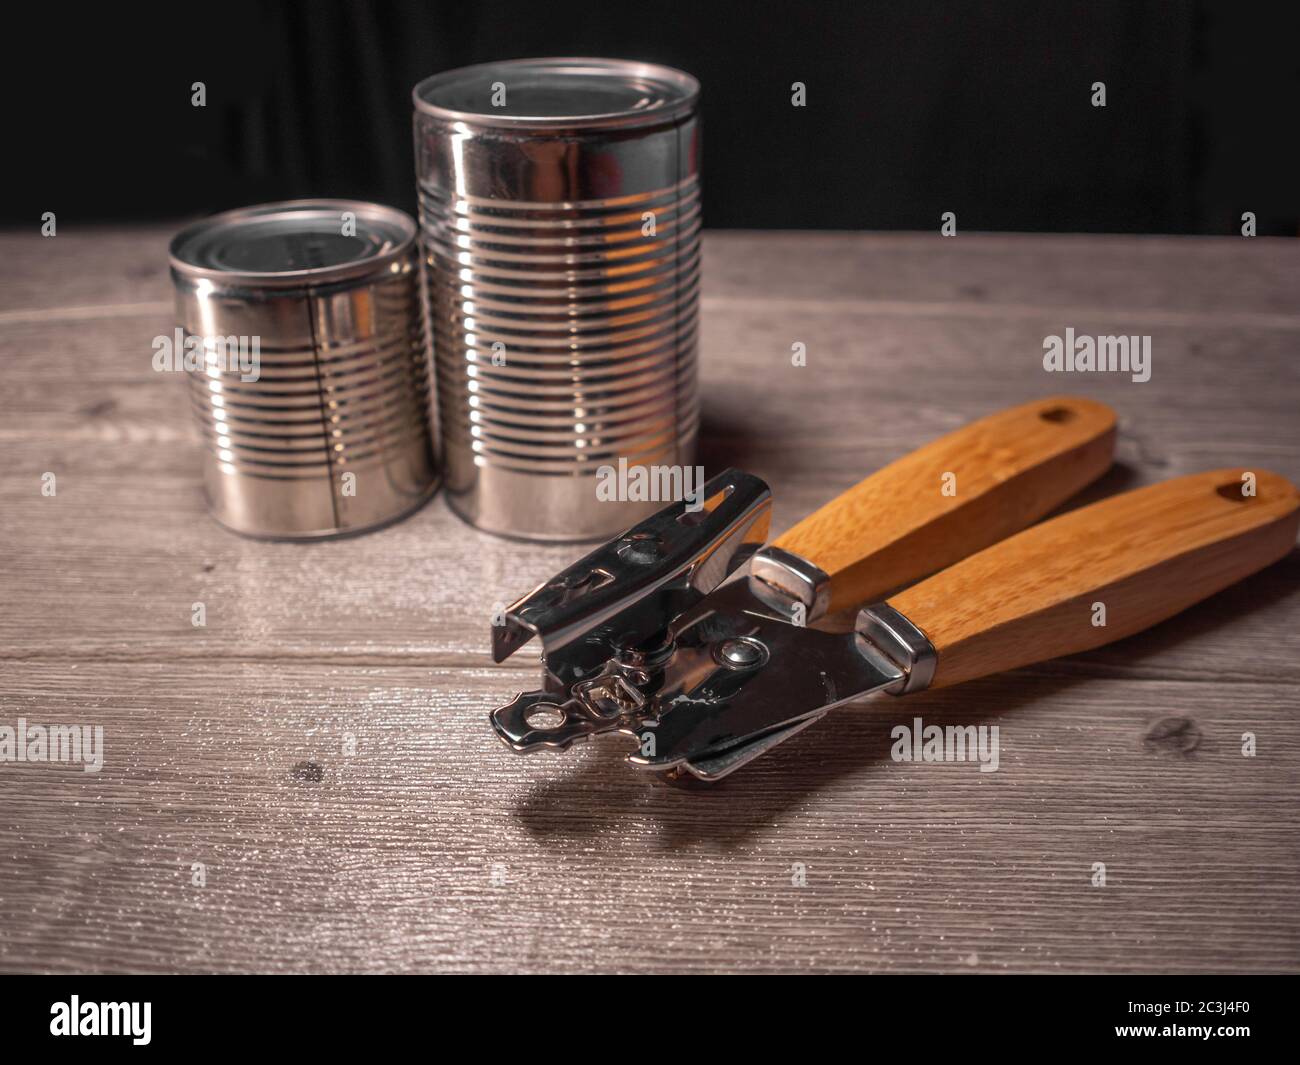 https://c8.alamy.com/comp/2C3J4F0/two-canned-aluminum-products-with-a-stainless-steel-and-wooden-can-opener-a-wooden-board-and-a-black-background-2C3J4F0.jpg